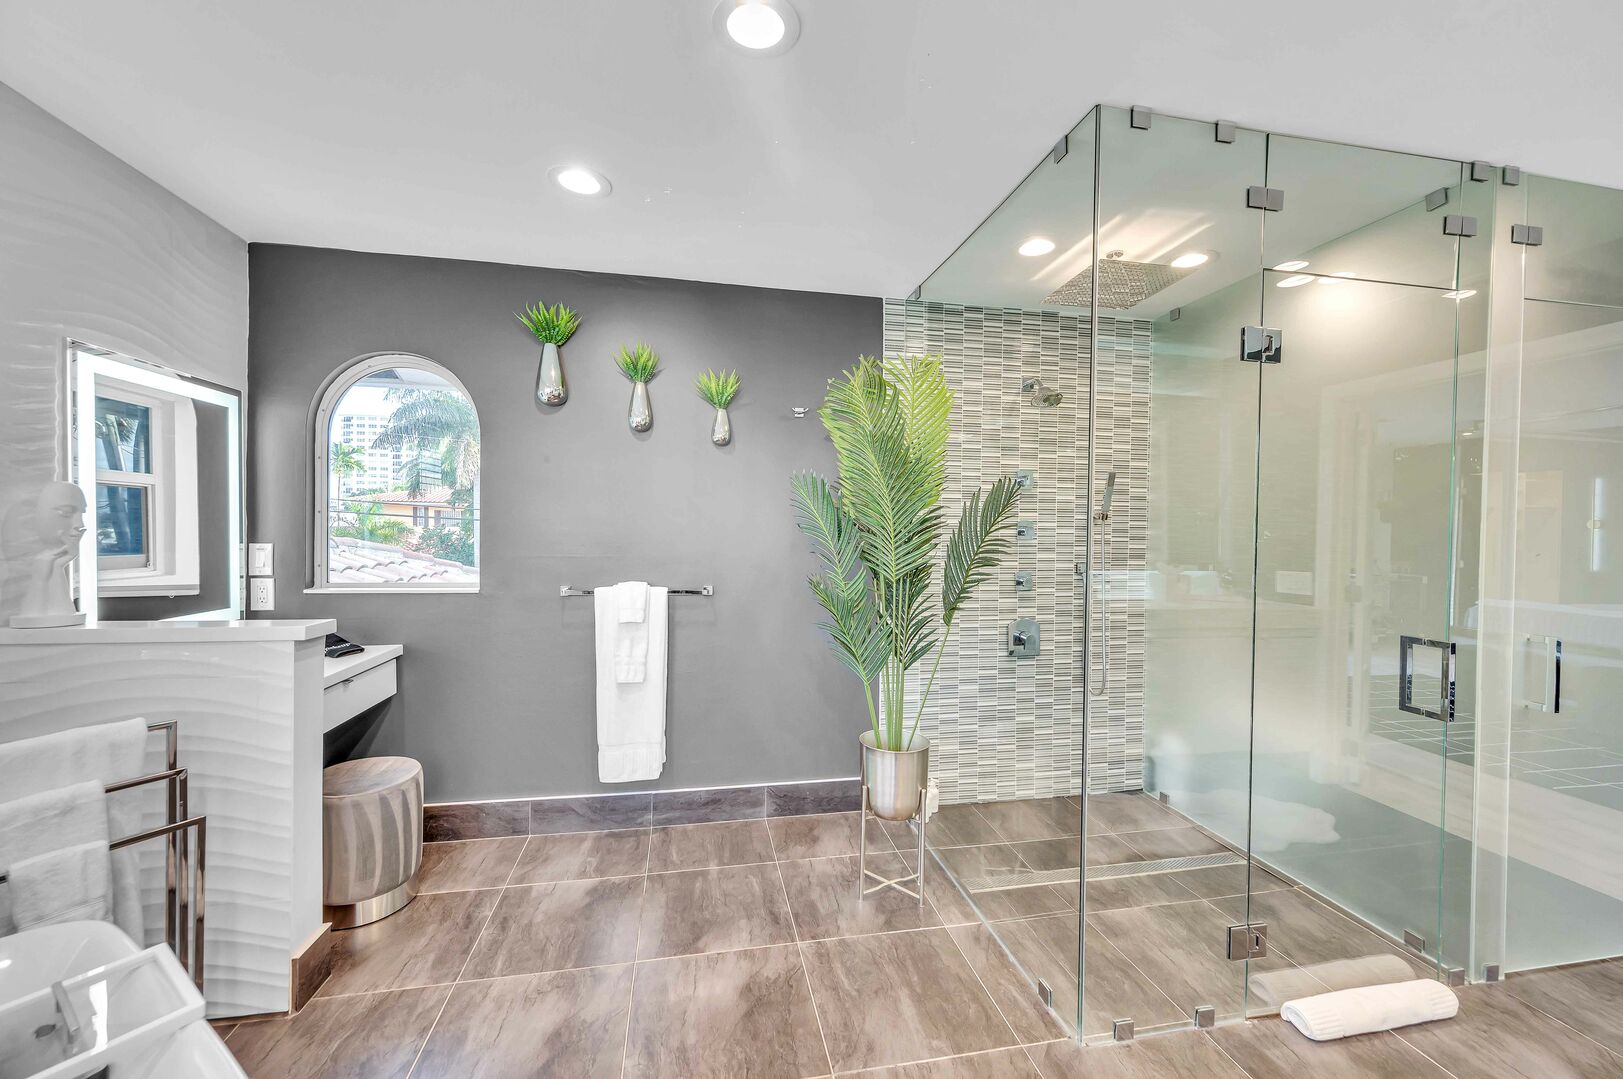 Primary Bathroom with two sinks, soaking tub, a vanity and a walk-in shower.